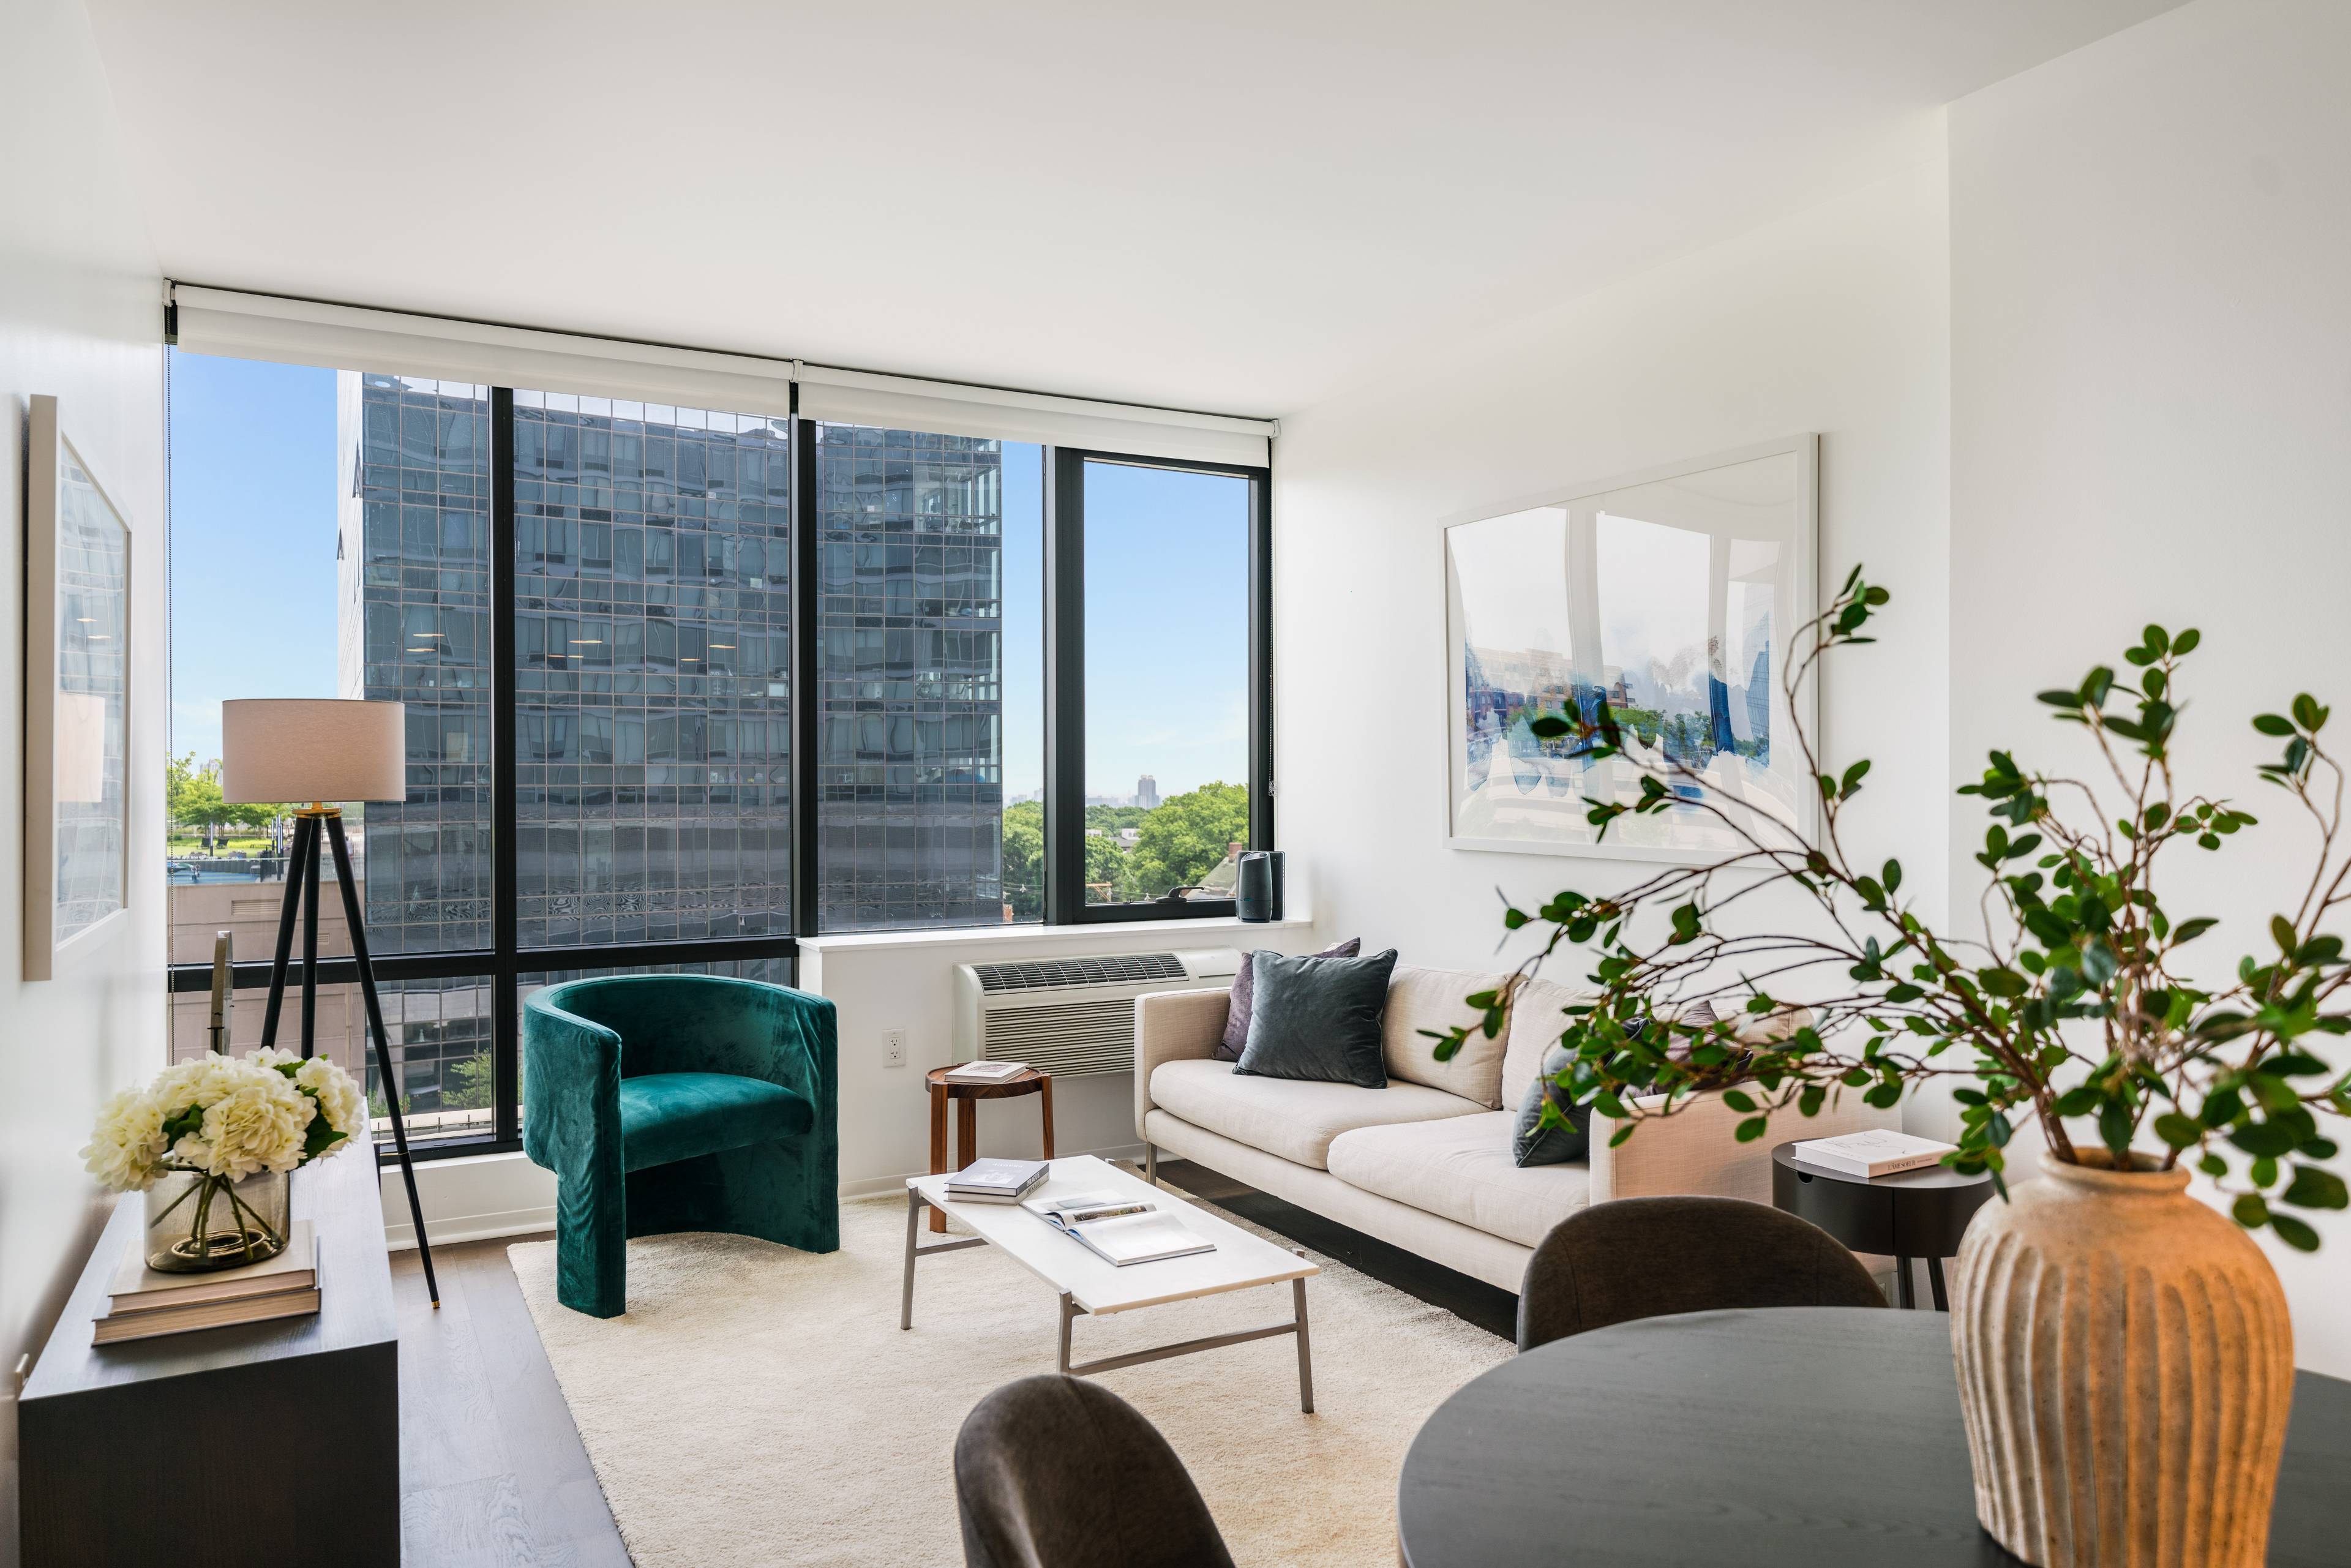 760 Sqft One Bedroom Residence Now Available at Hudson Lights!  Eastern NYC Views!